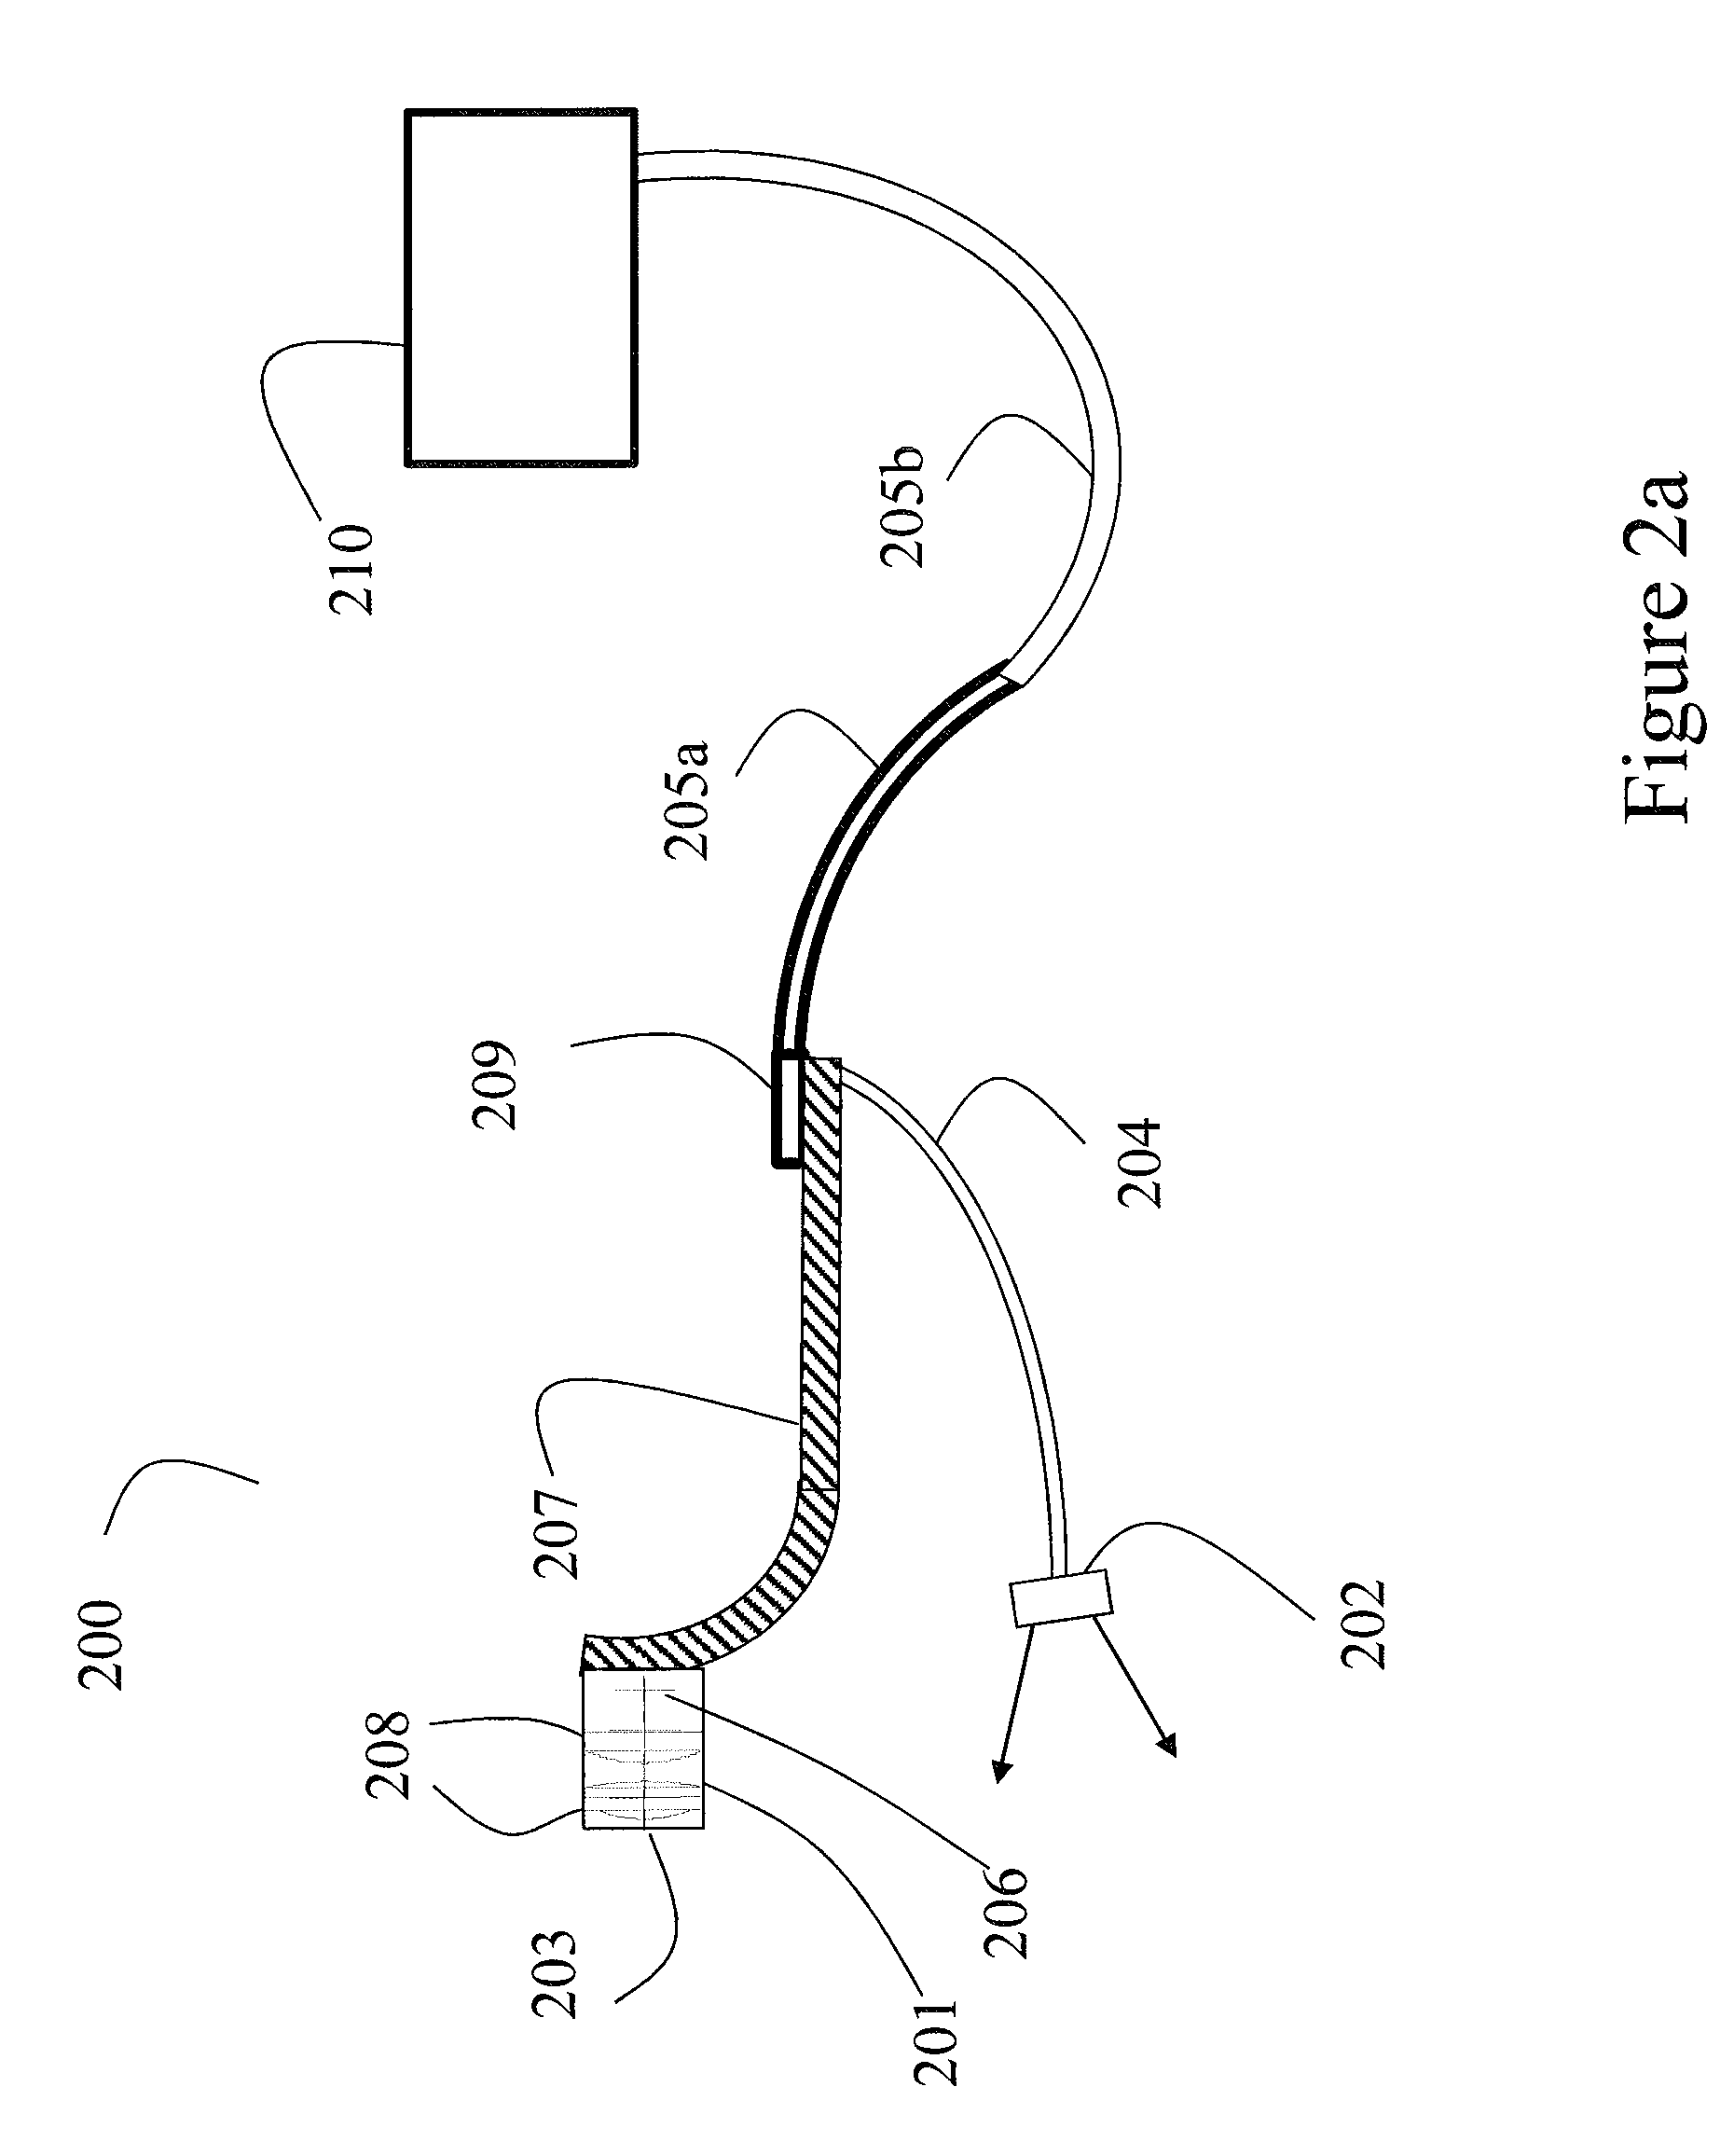 Disposable endoscopic access device and portable display